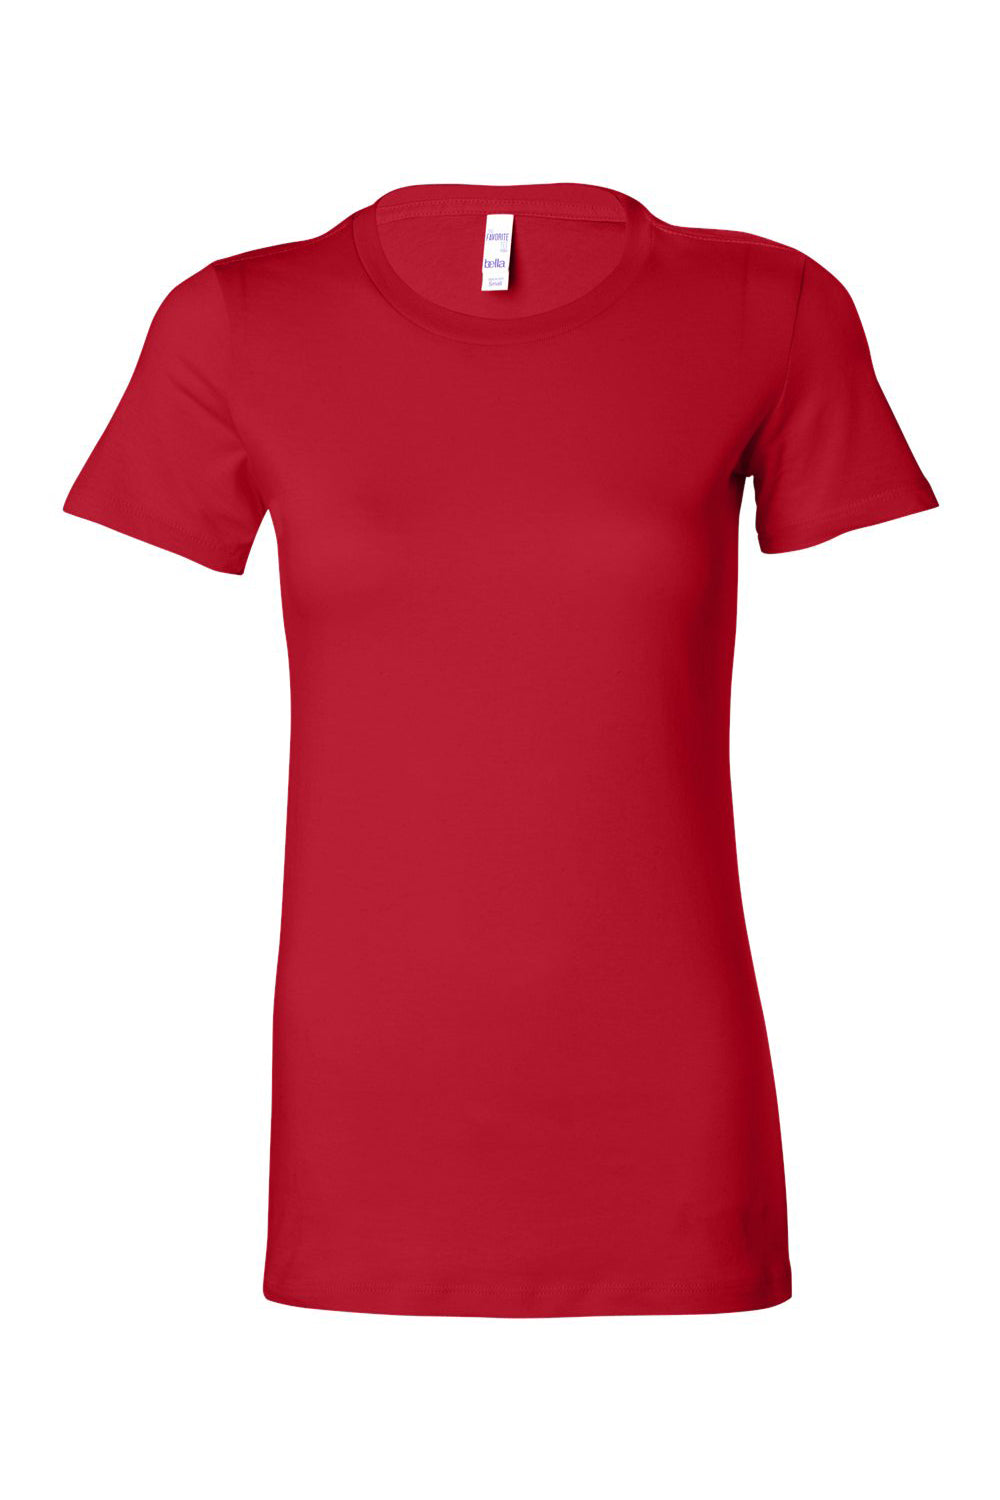 Bella + Canvas BC6004/6004 Womens The Favorite Short Sleeve Crewneck T-Shirt Red Flat Front